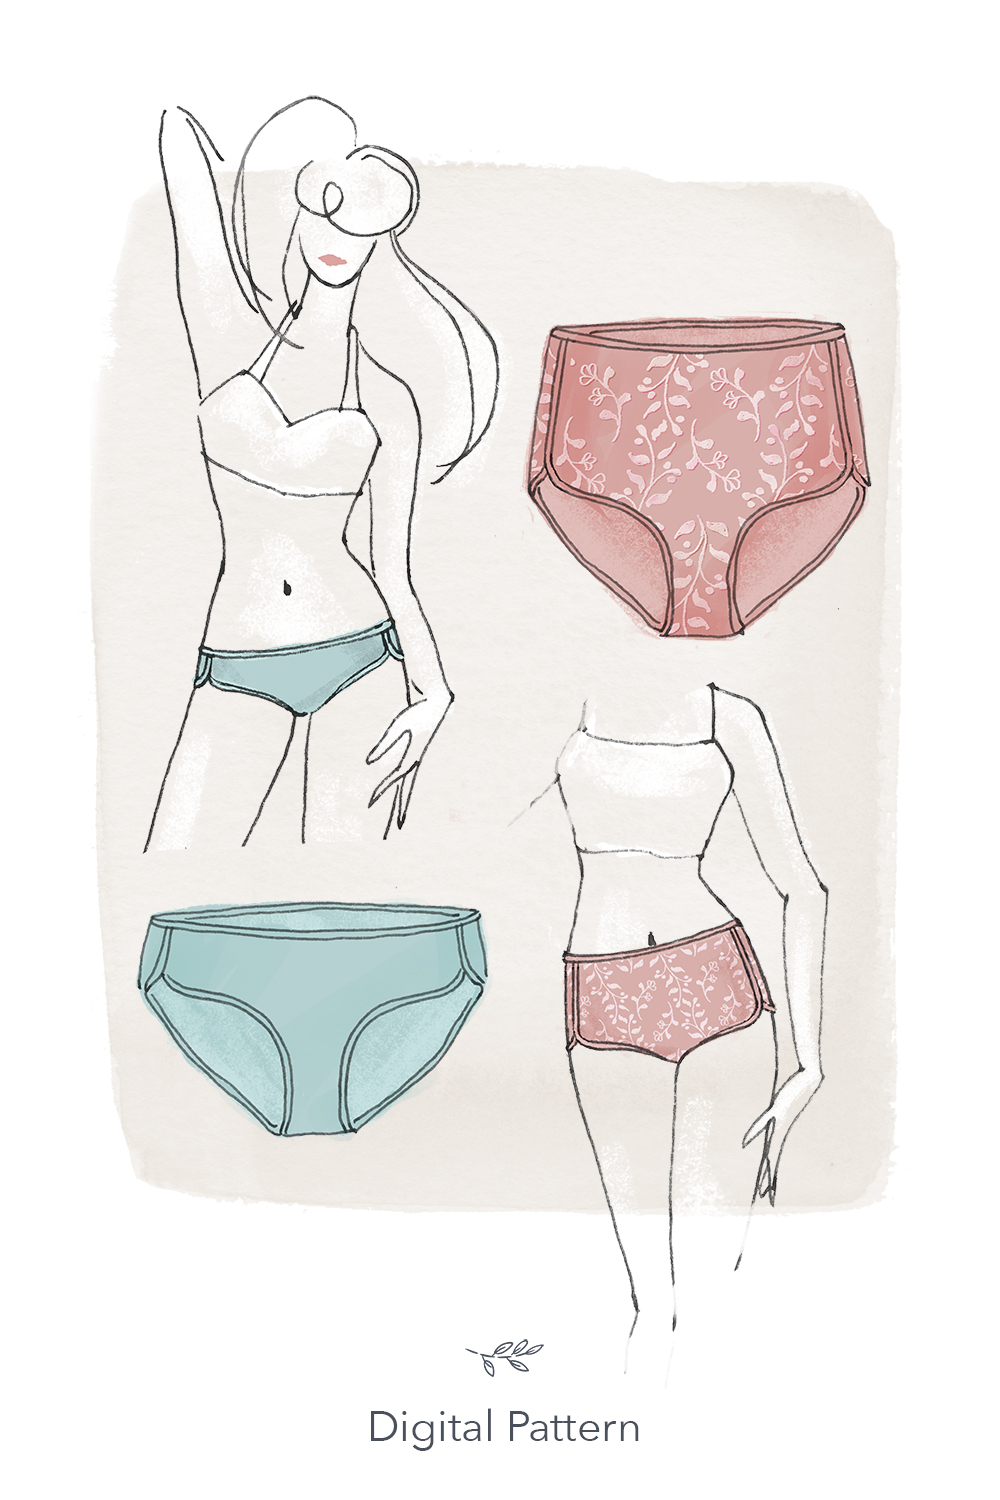 Make underwear sewing pattern for your clothing line by